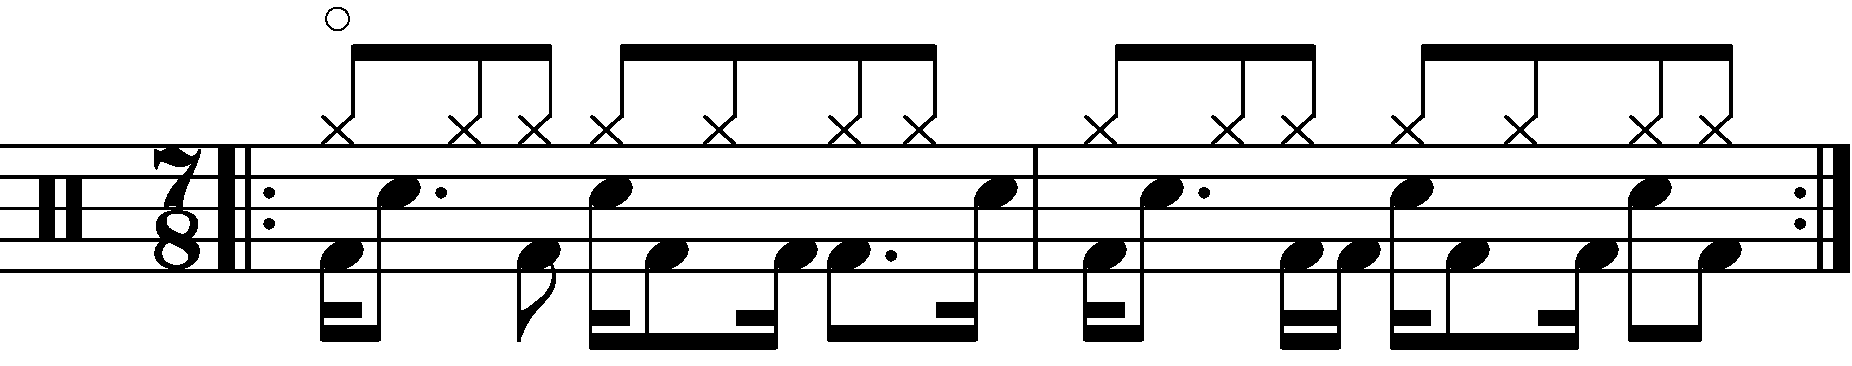 A two bar compound 7/8 groove